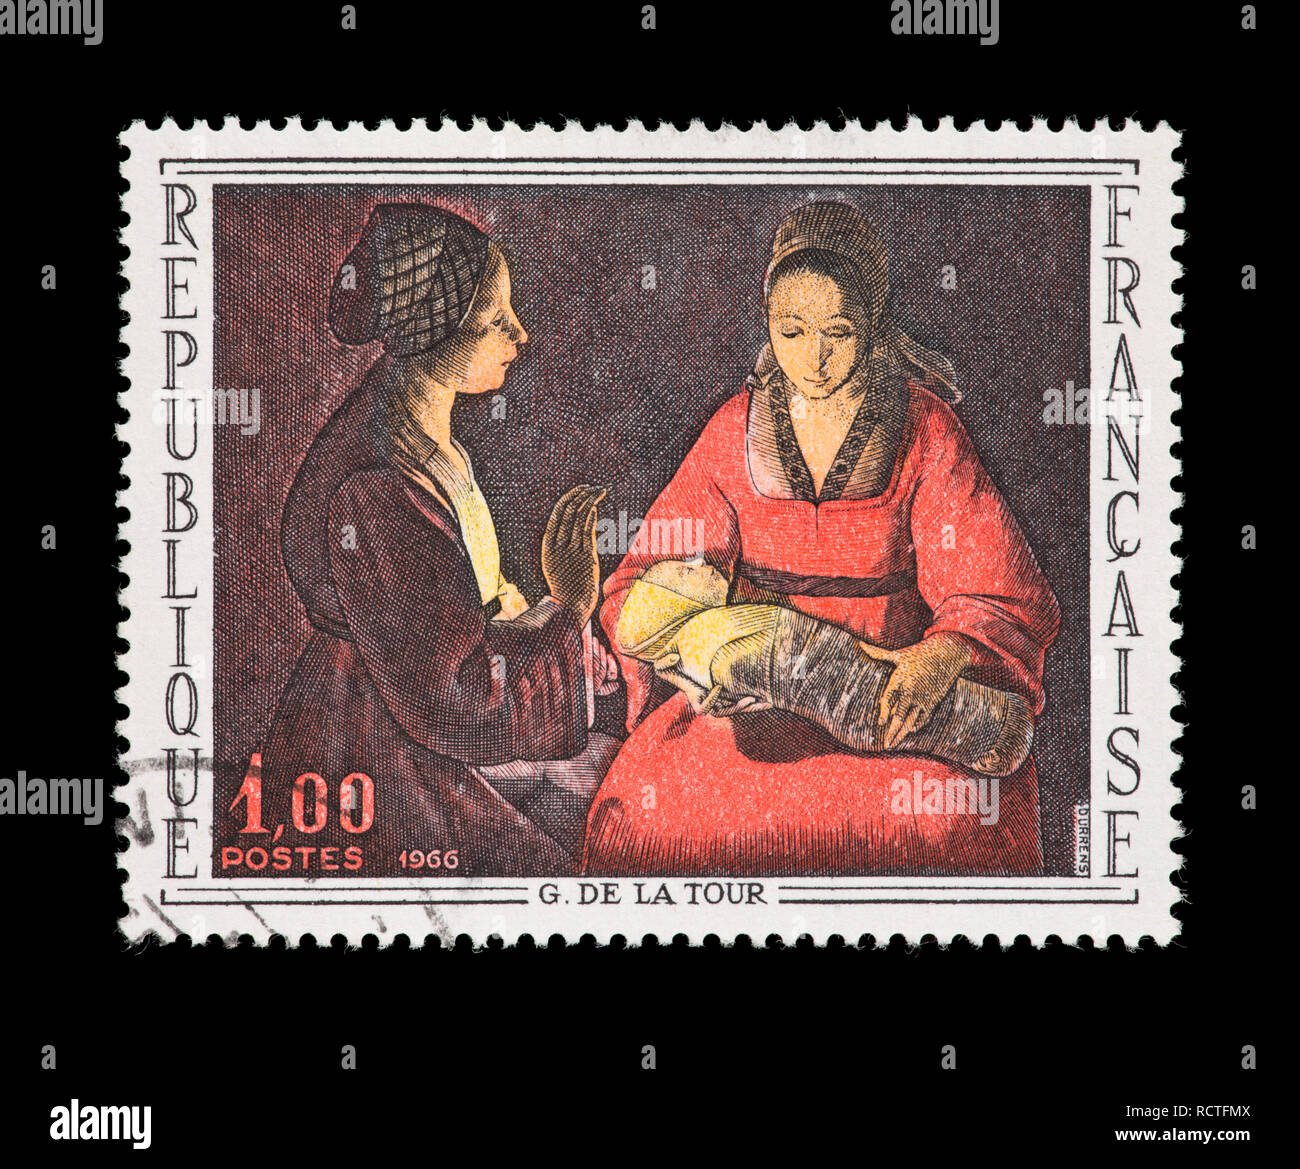 Postage stamp from France depicting the Georges de La Tour painting 'The Newborn' Stock Photo